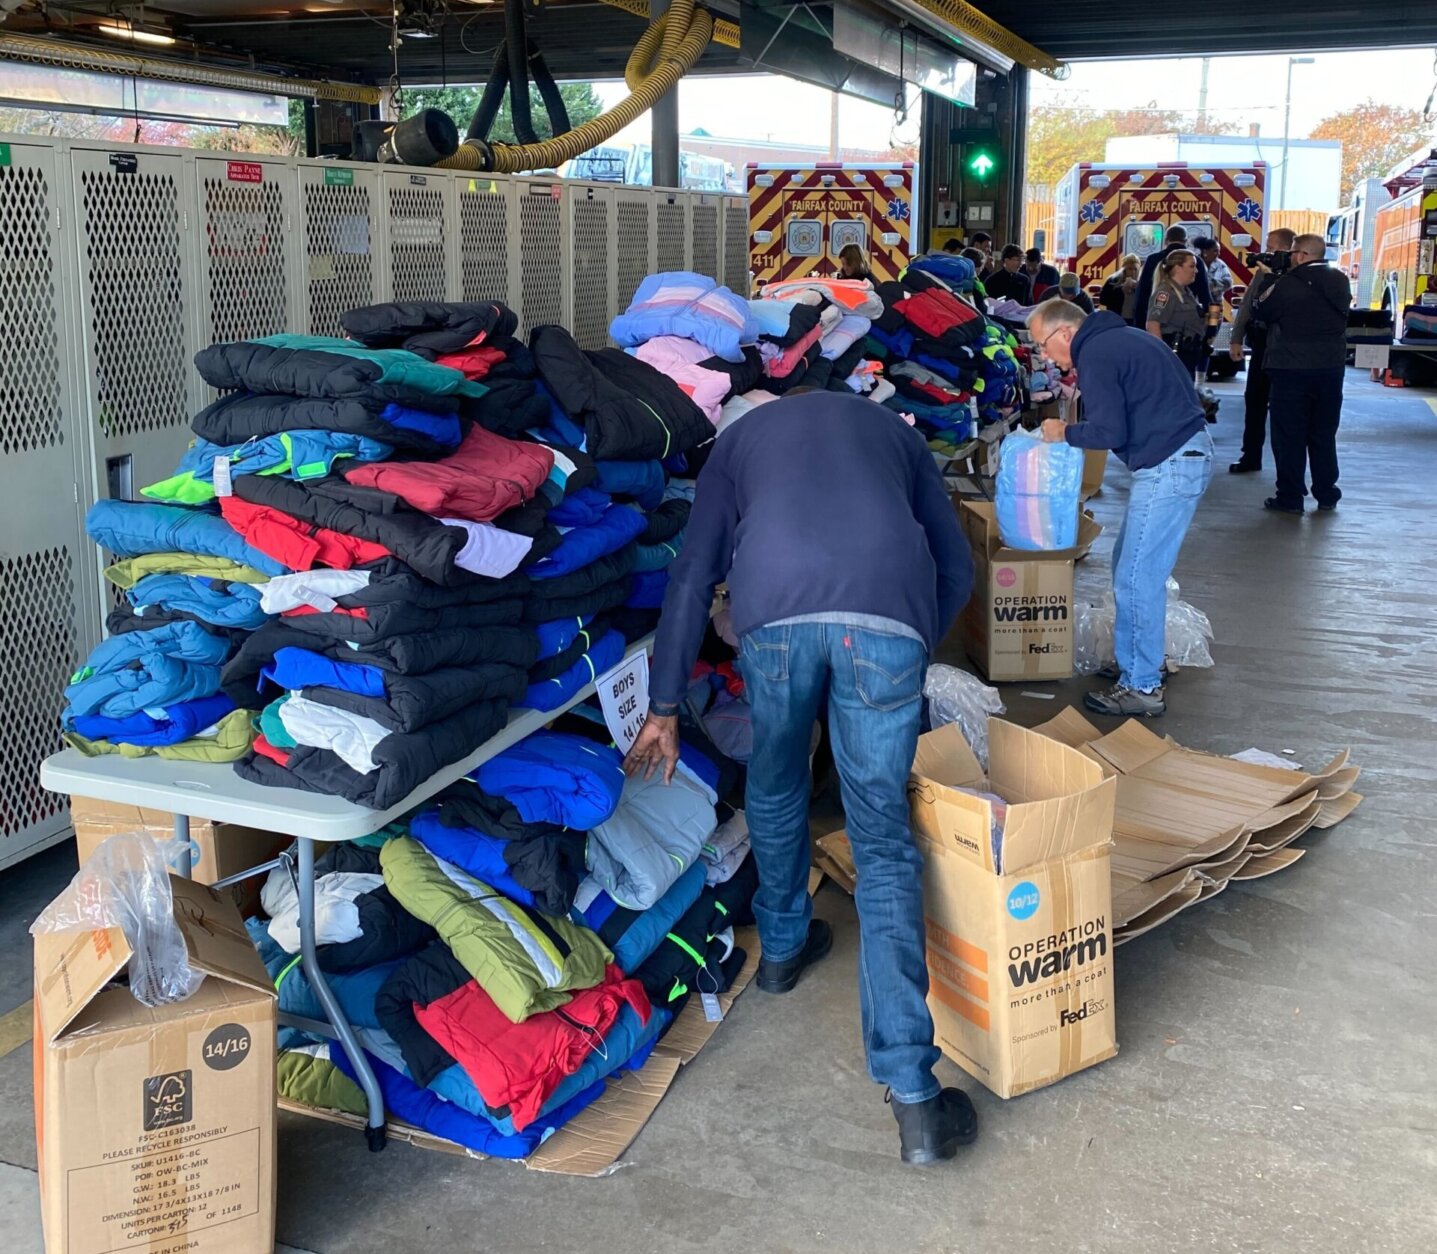 People sort through piles of coats stacked both on and below tables